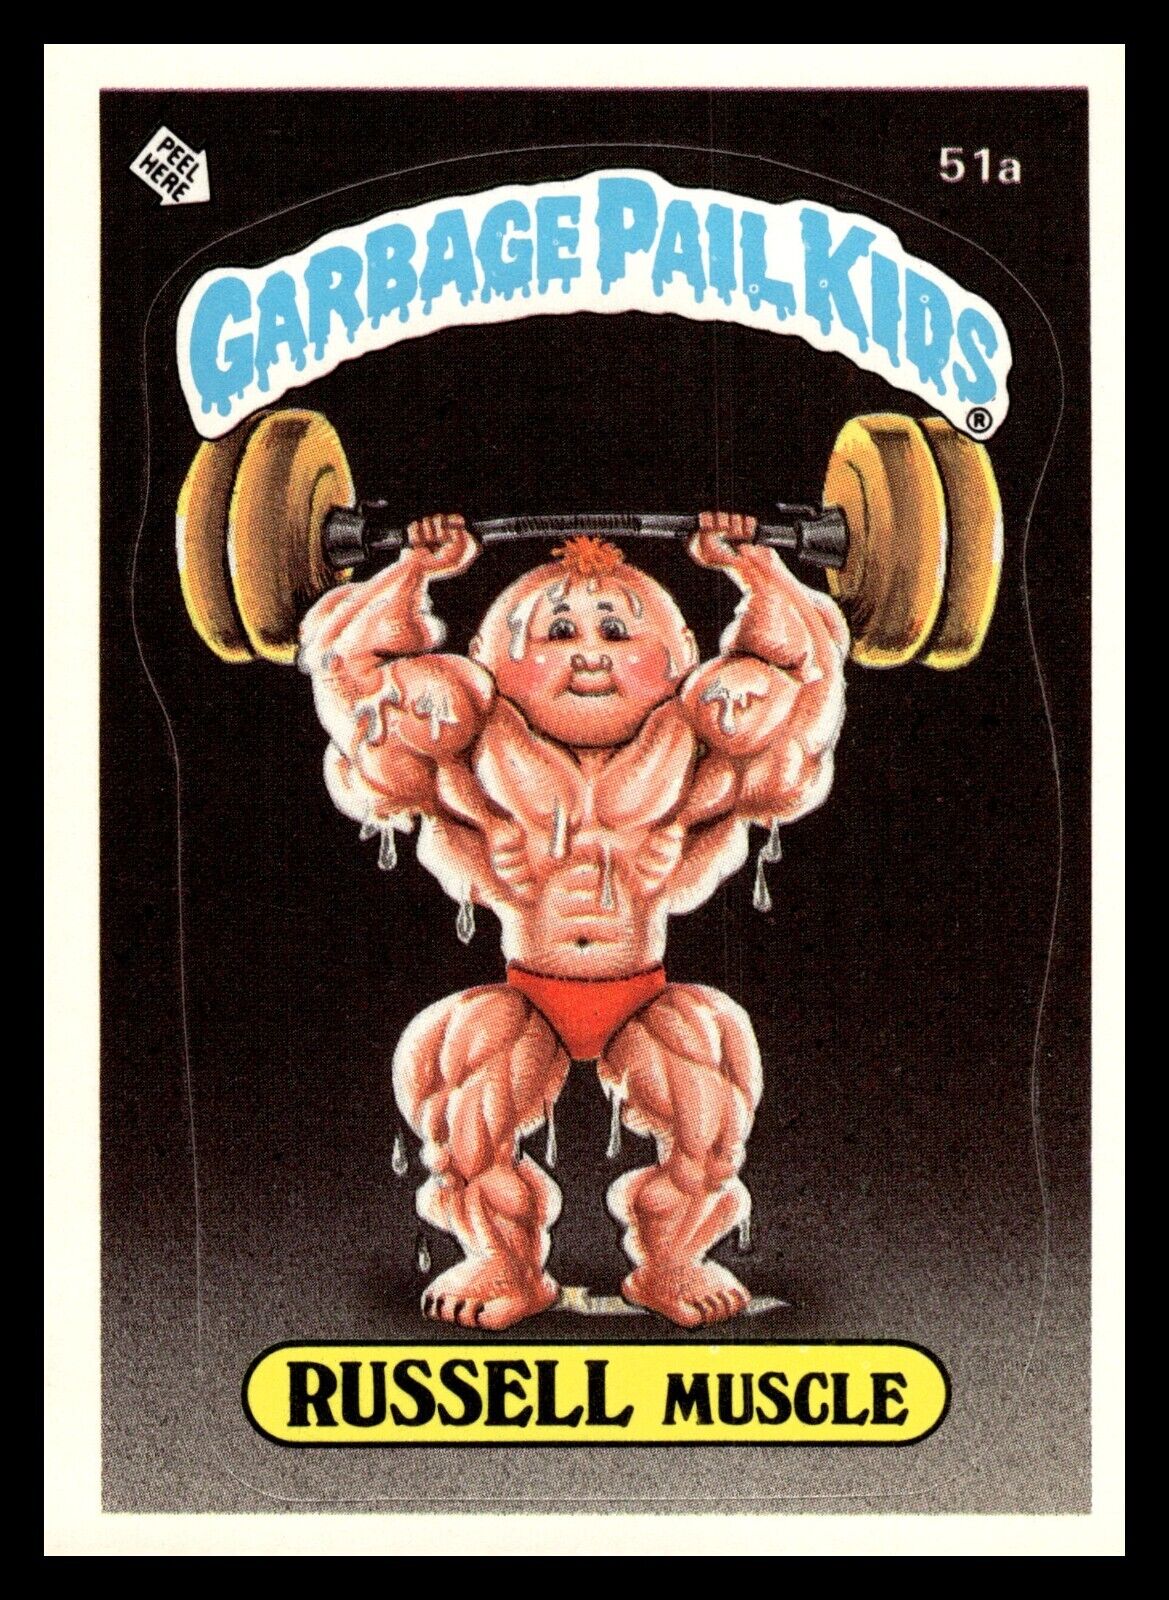 1985 Topps Garbage Pail Kids 2nd Series 2 Glossy Back Card #51a Russell Muscle